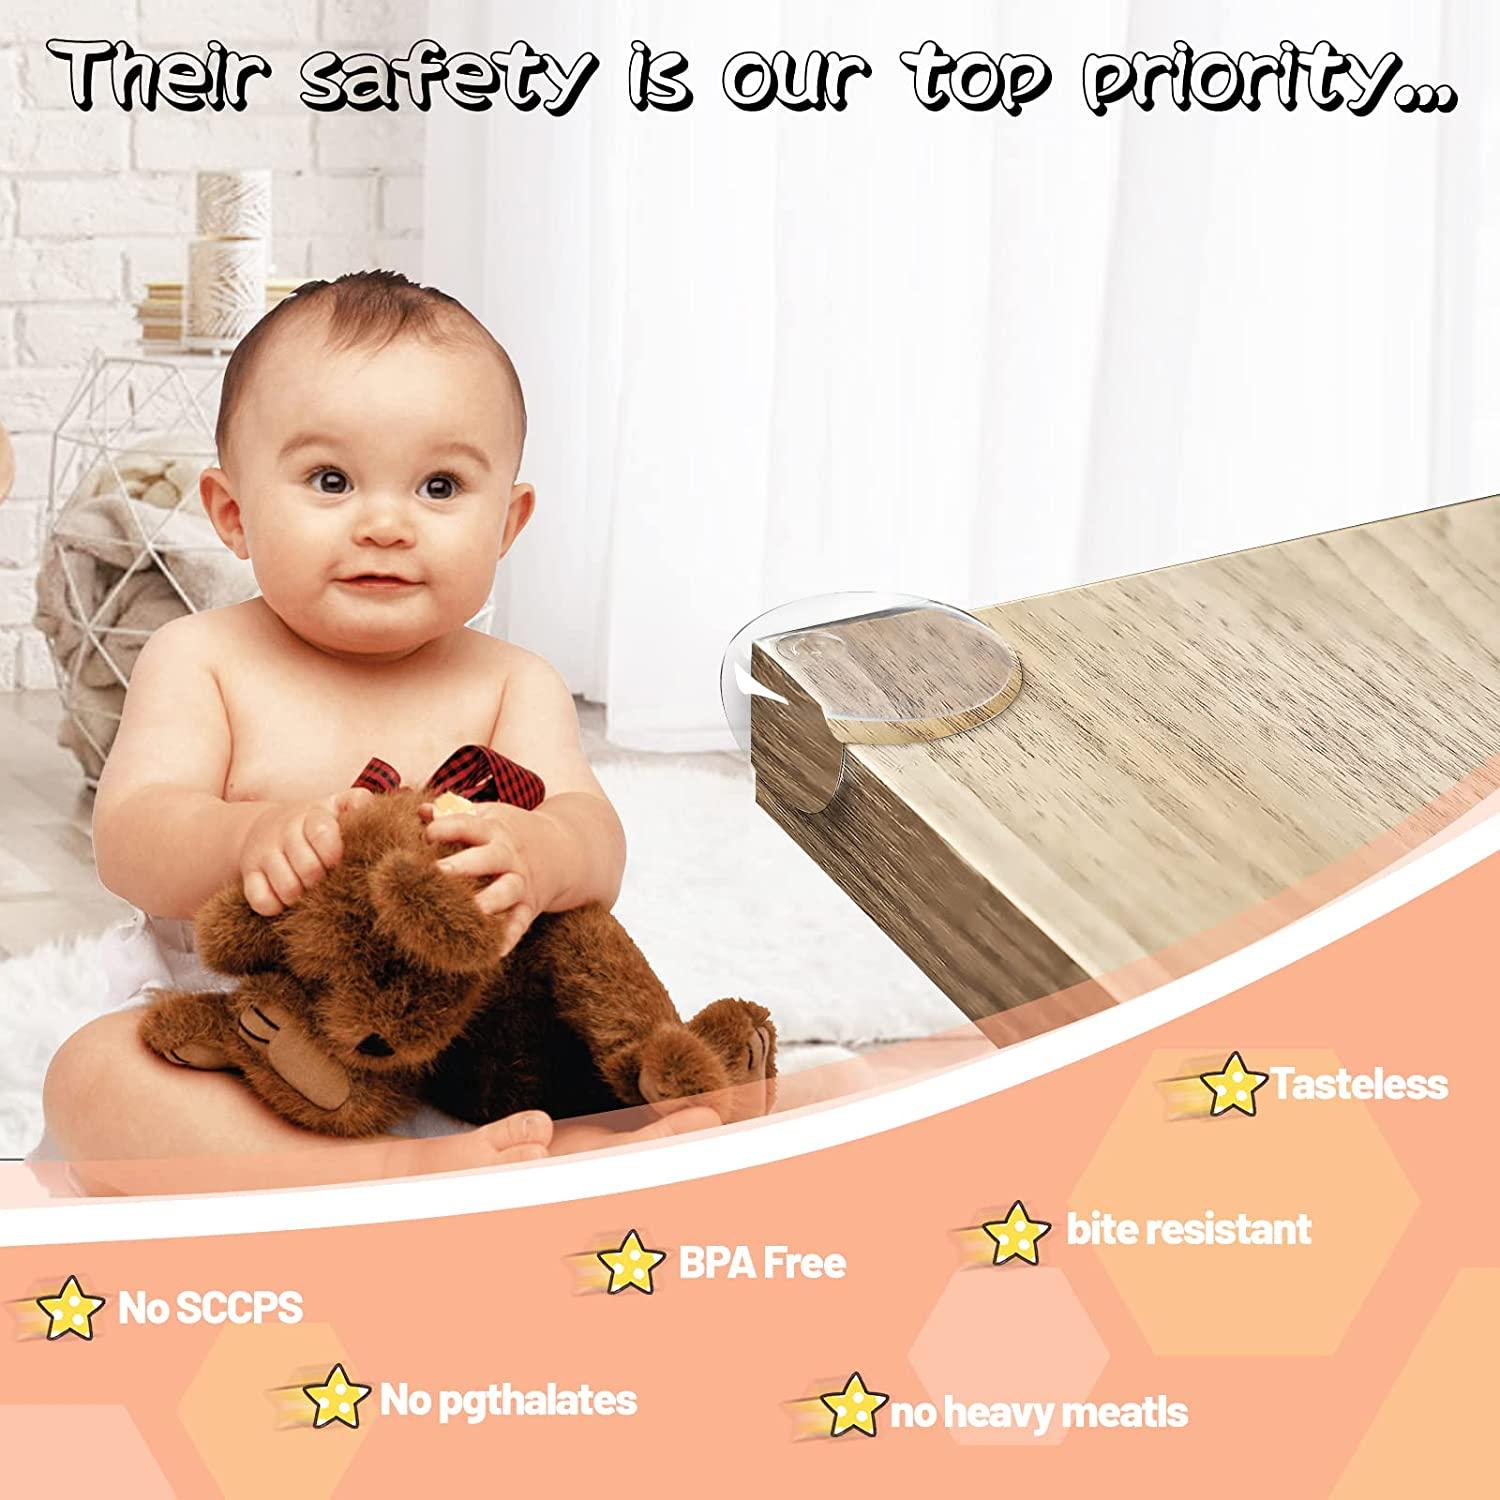 Suptree Table Corner Protectors for Furniture Baby Safety Proofing Corner Guards 20 Pack, Clear